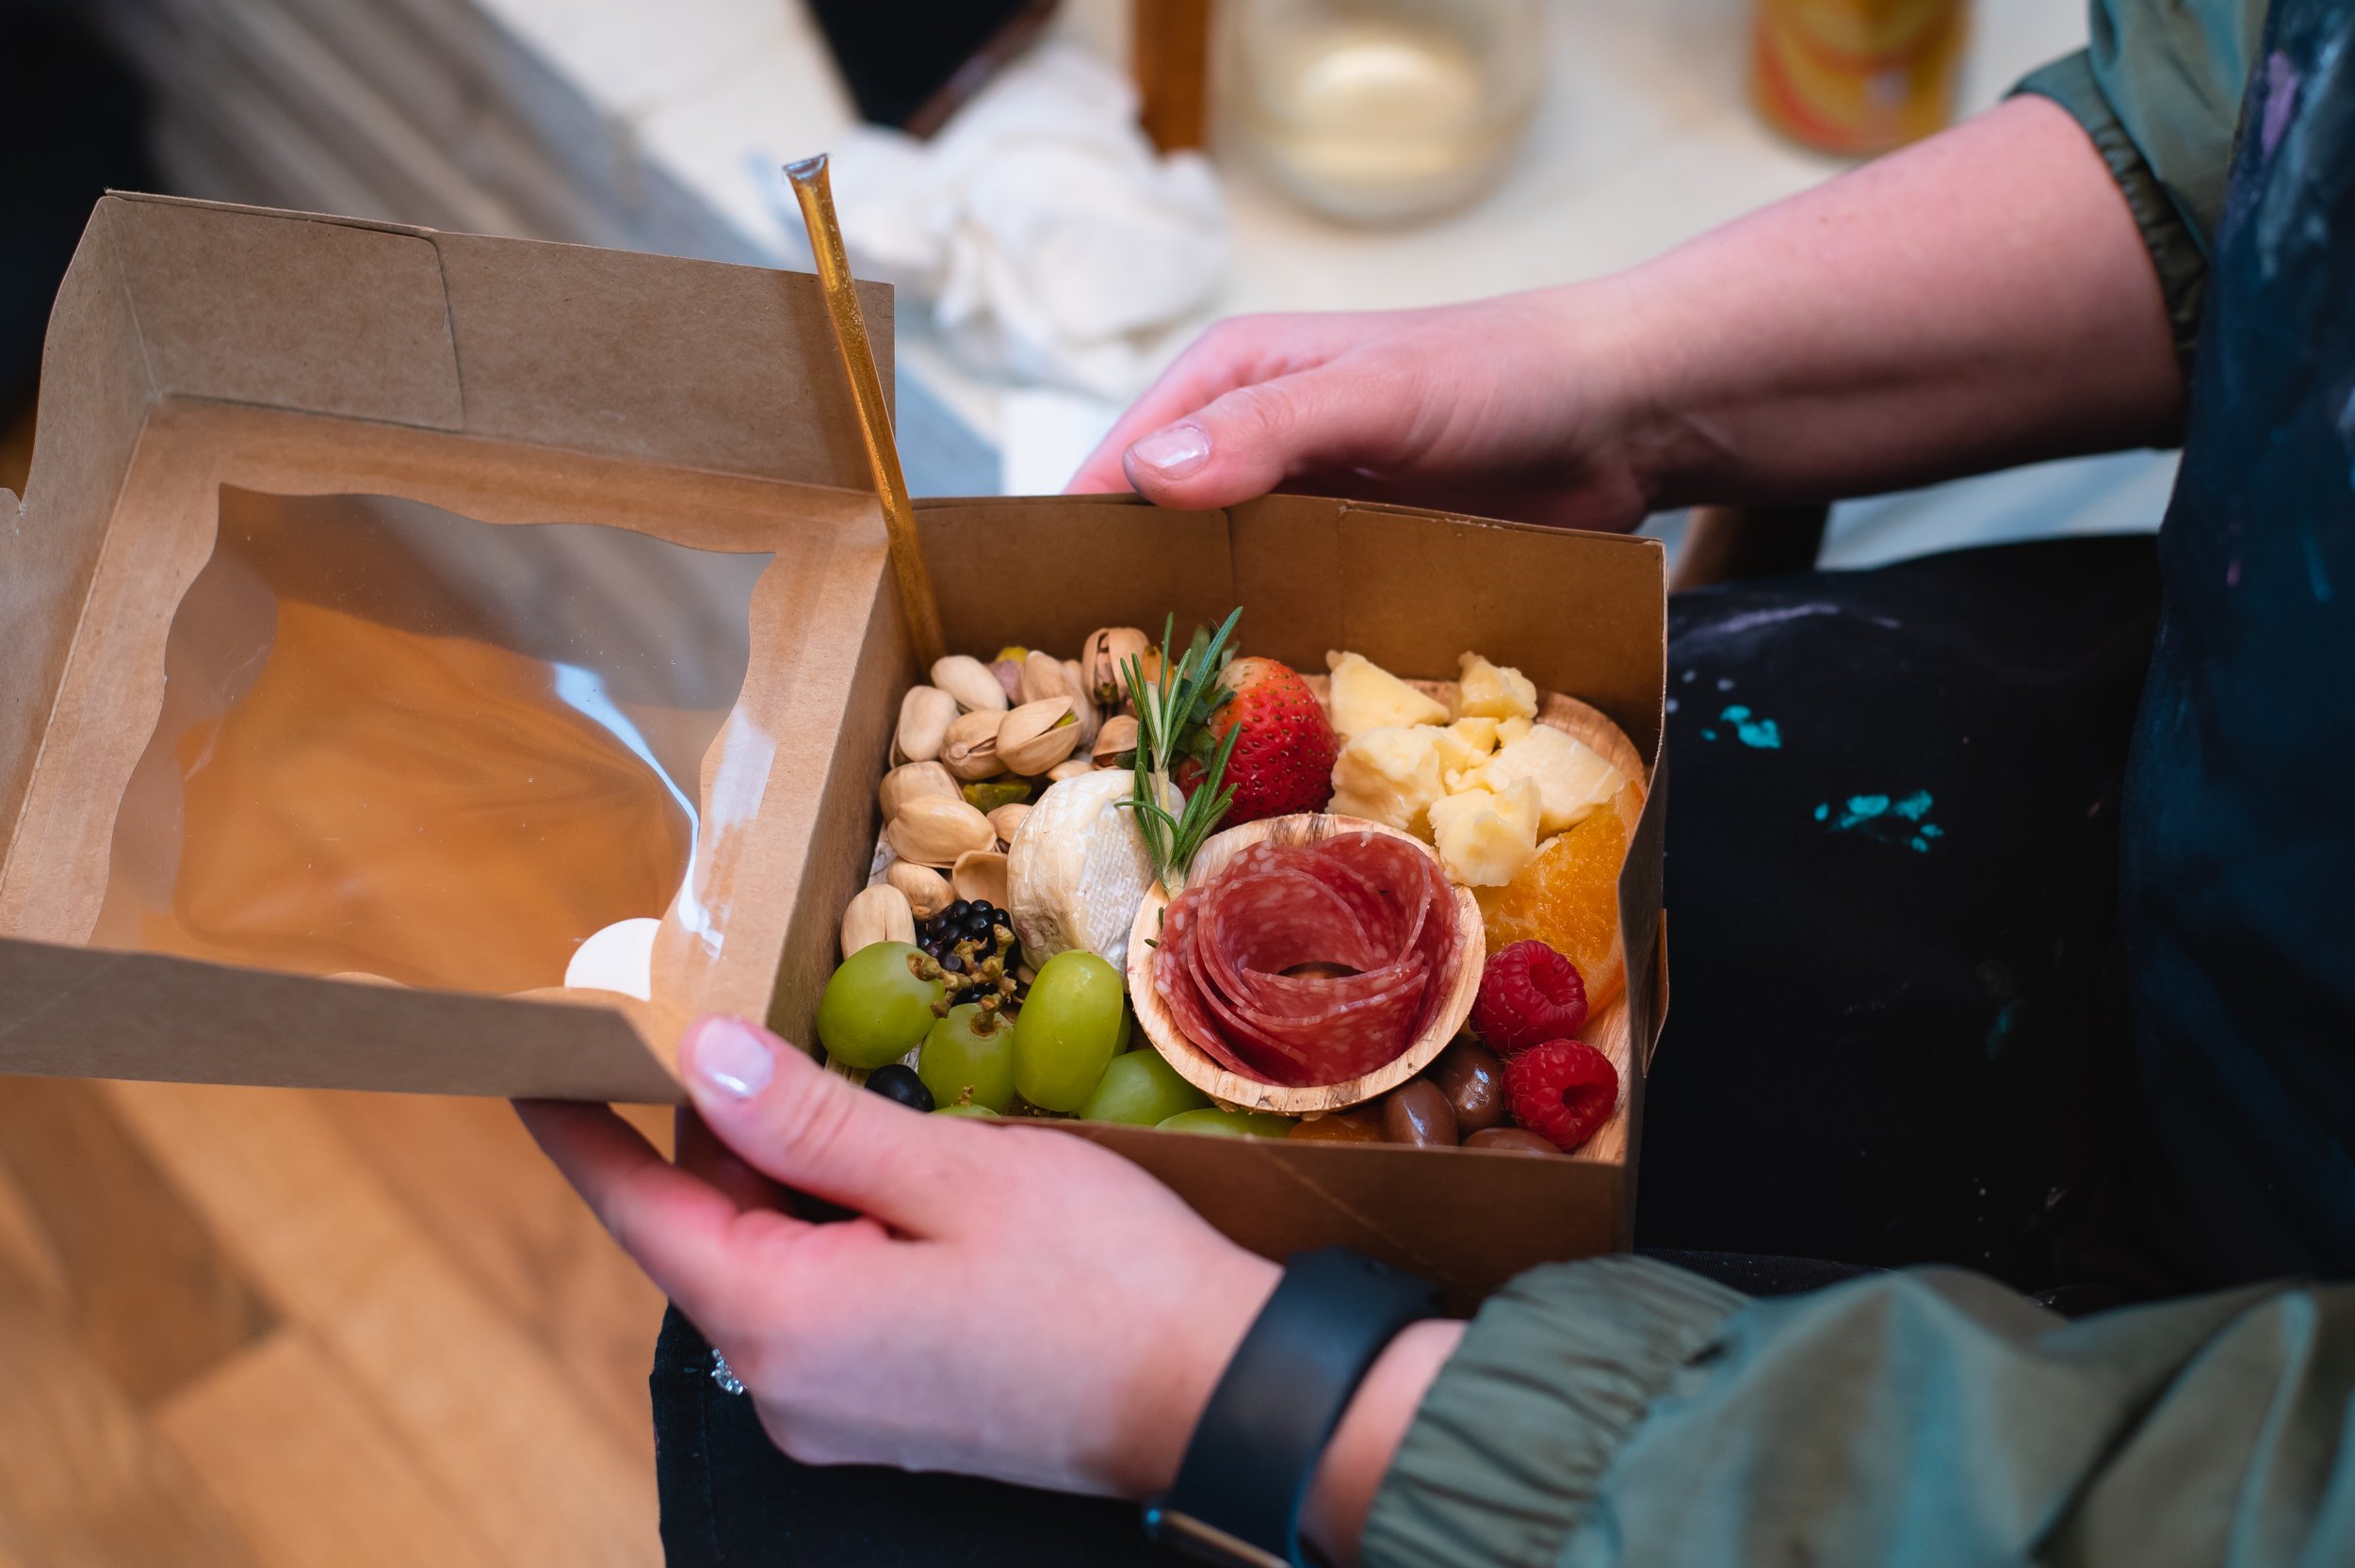 2021 and 2022 - Charcuterie by Bree creates individual boxes for lunches